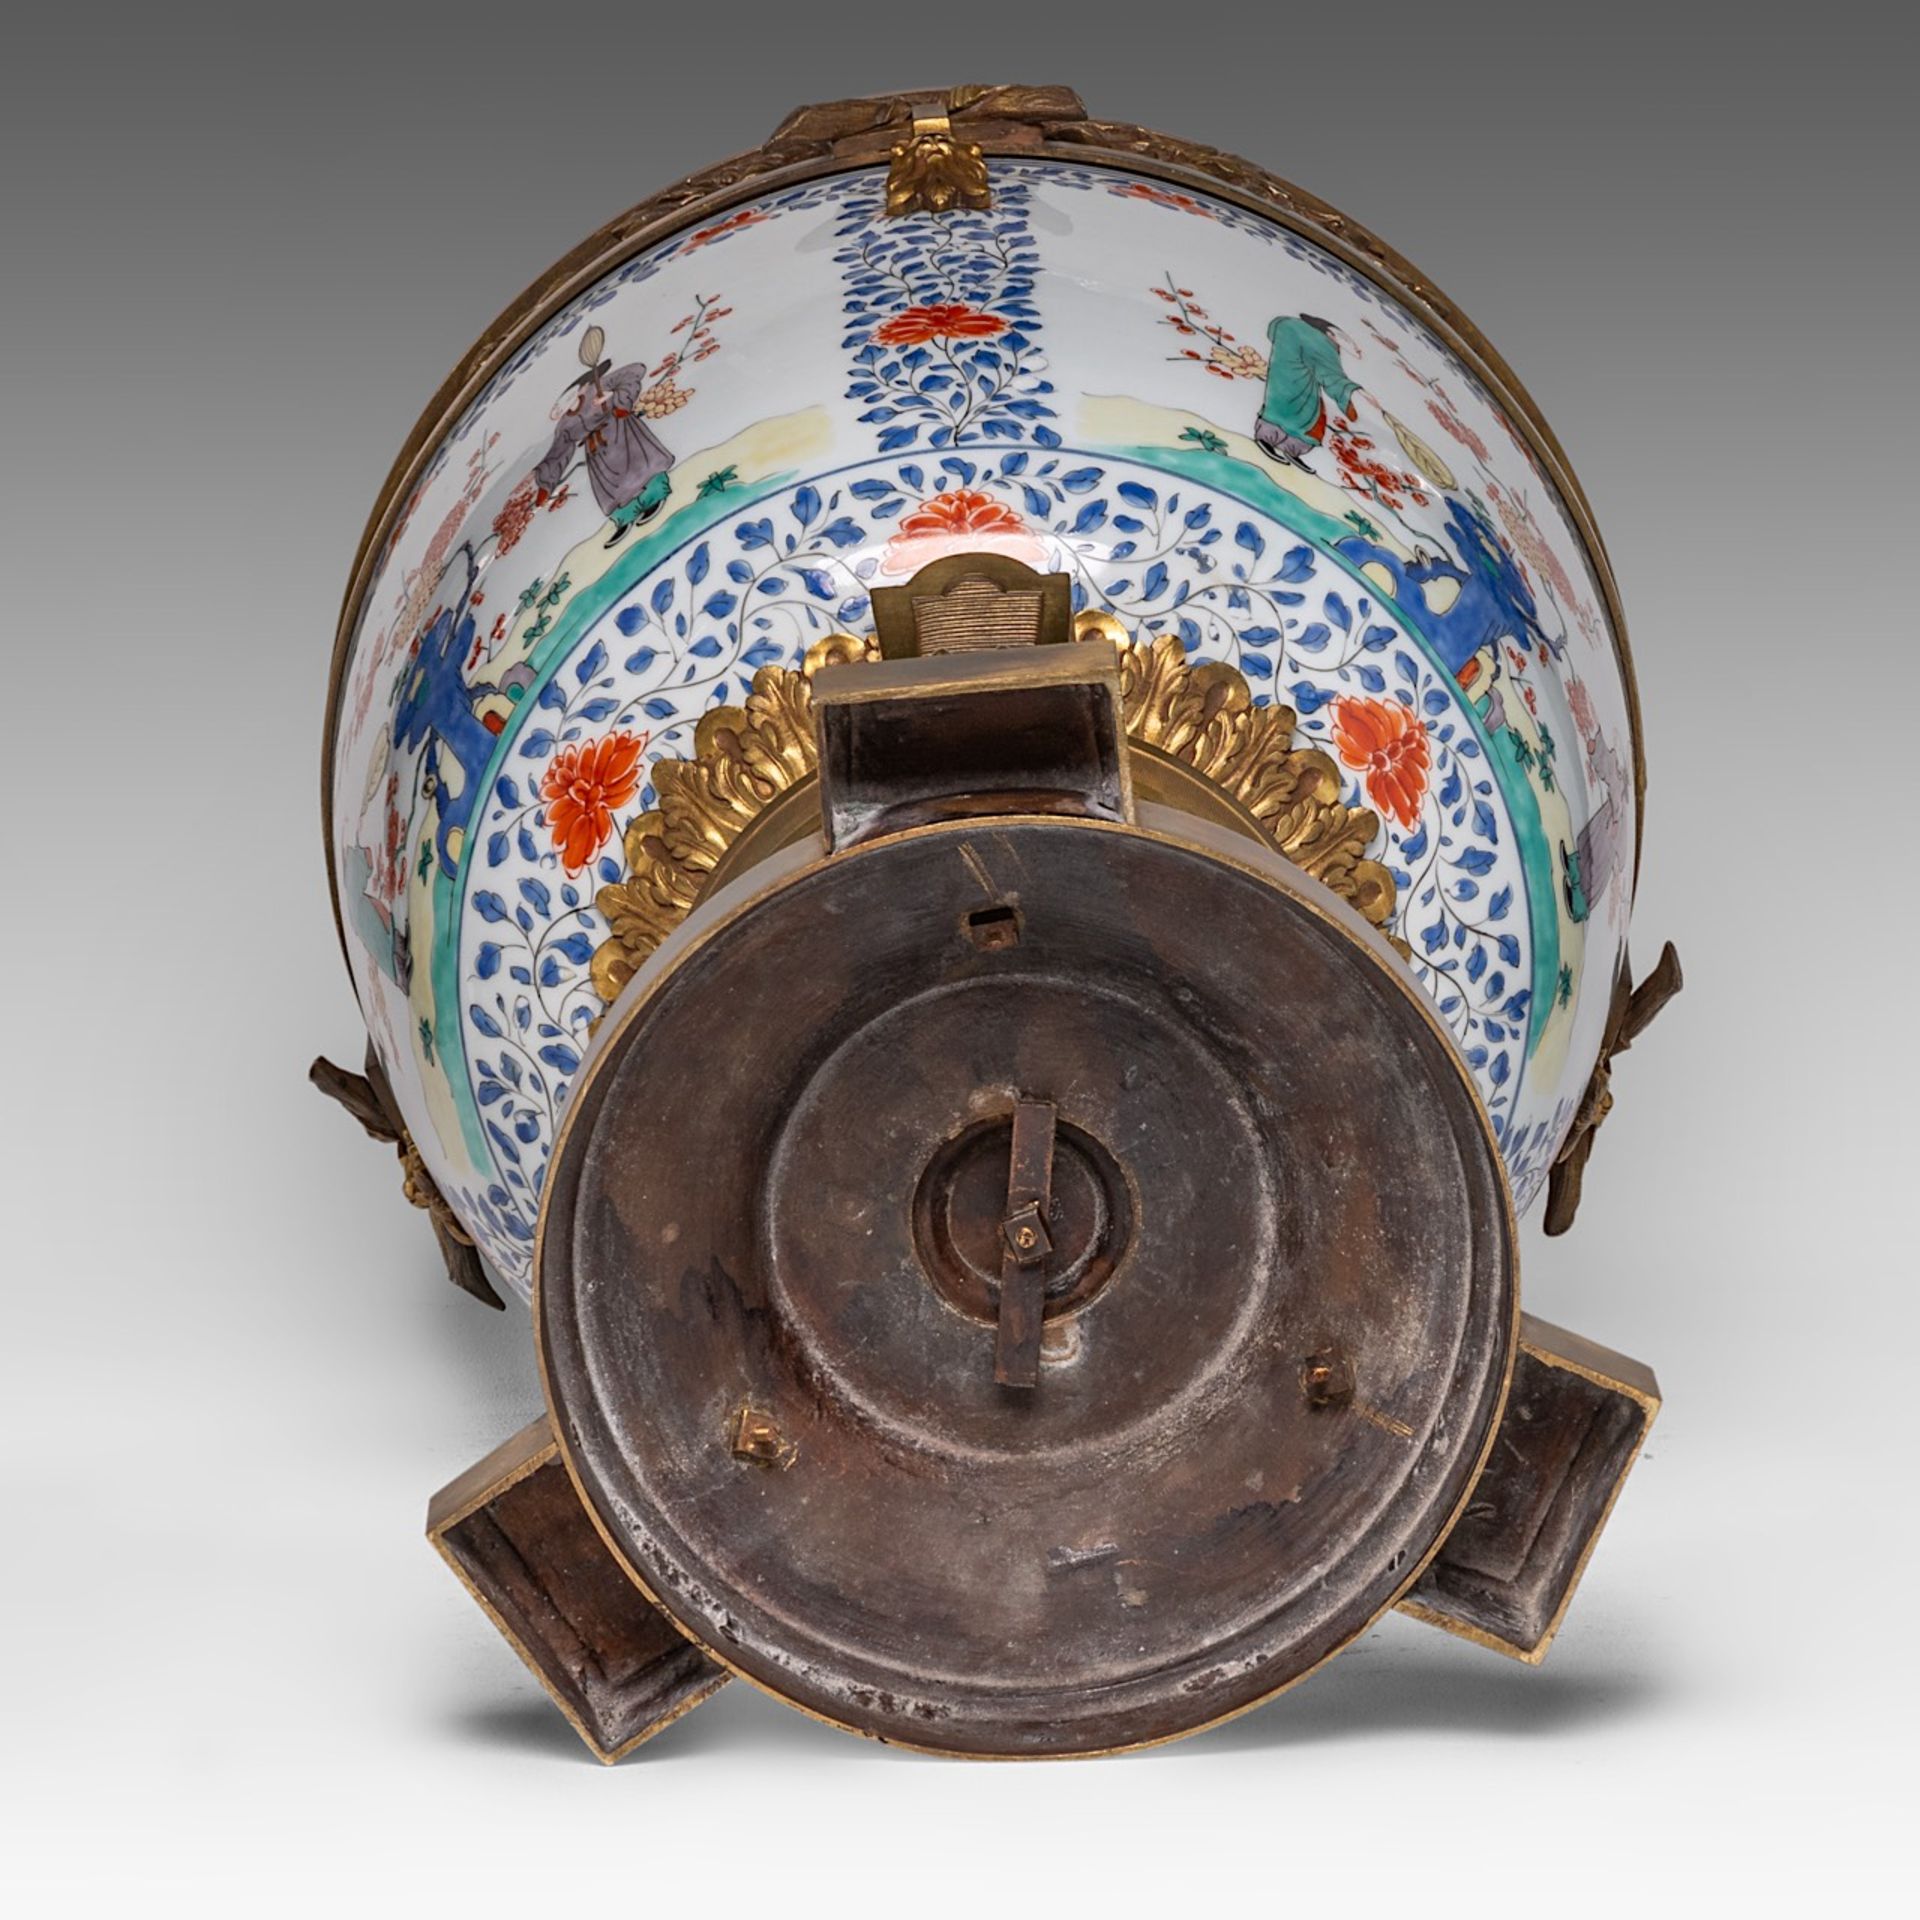 A Kakiemon-style tureen and cover, impressively mounted, late 18thC, total H 66 cm - Image 7 of 9